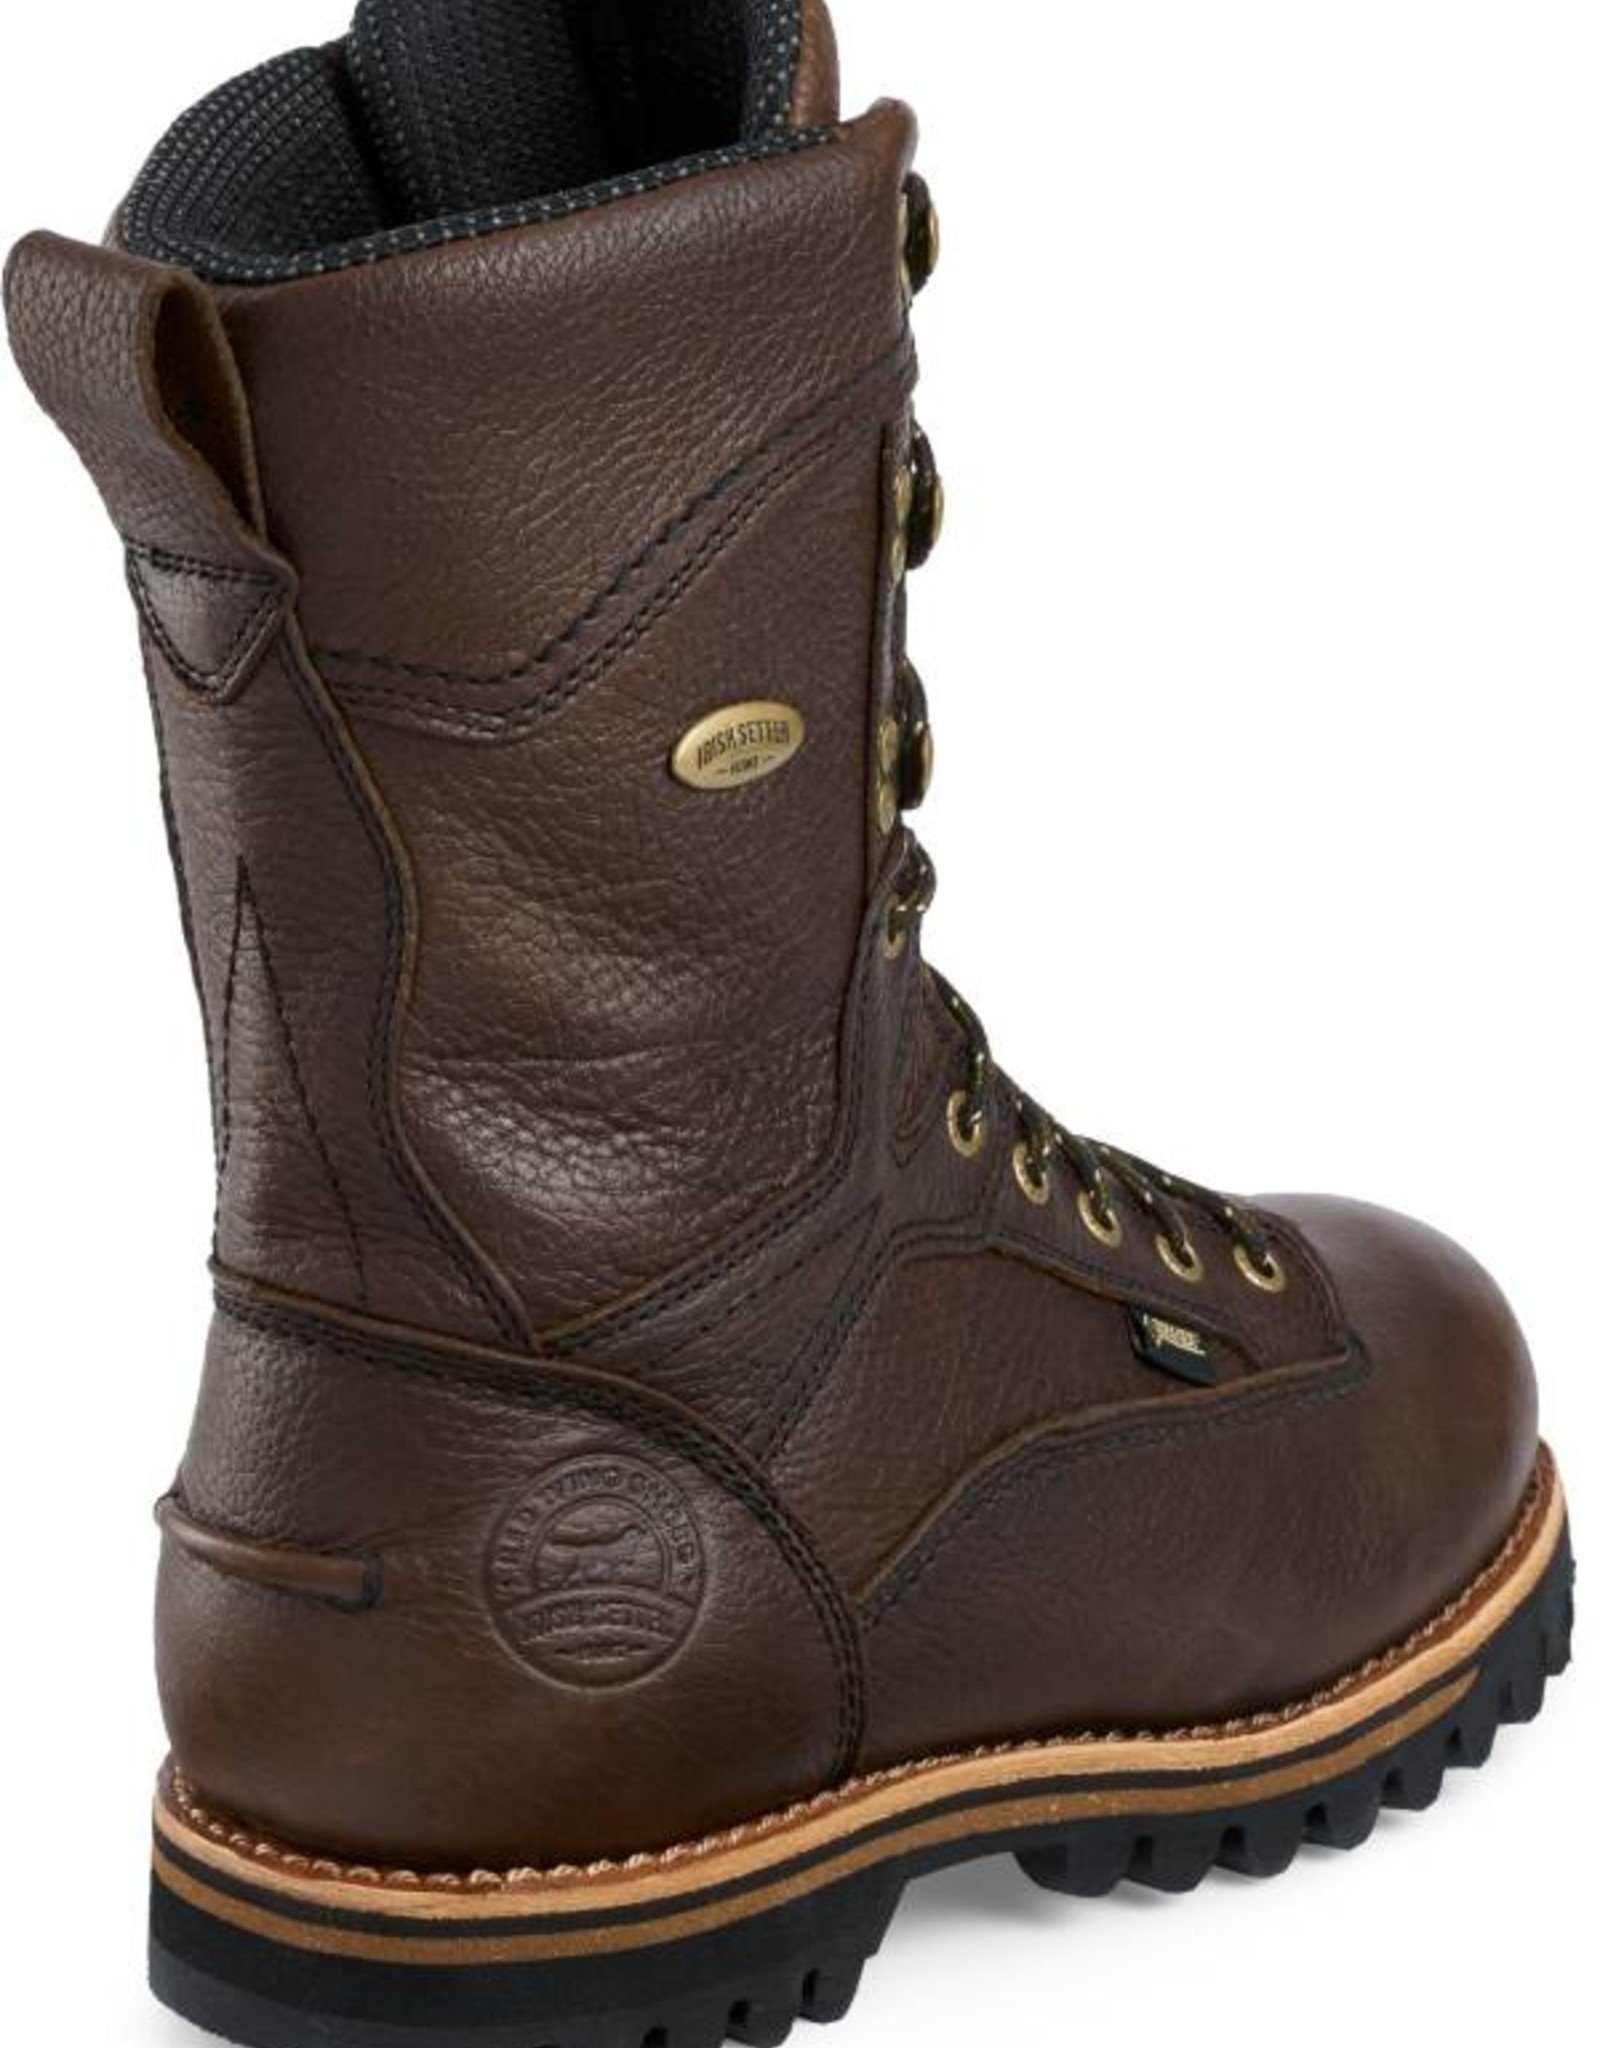 red wing boots 1000 grams